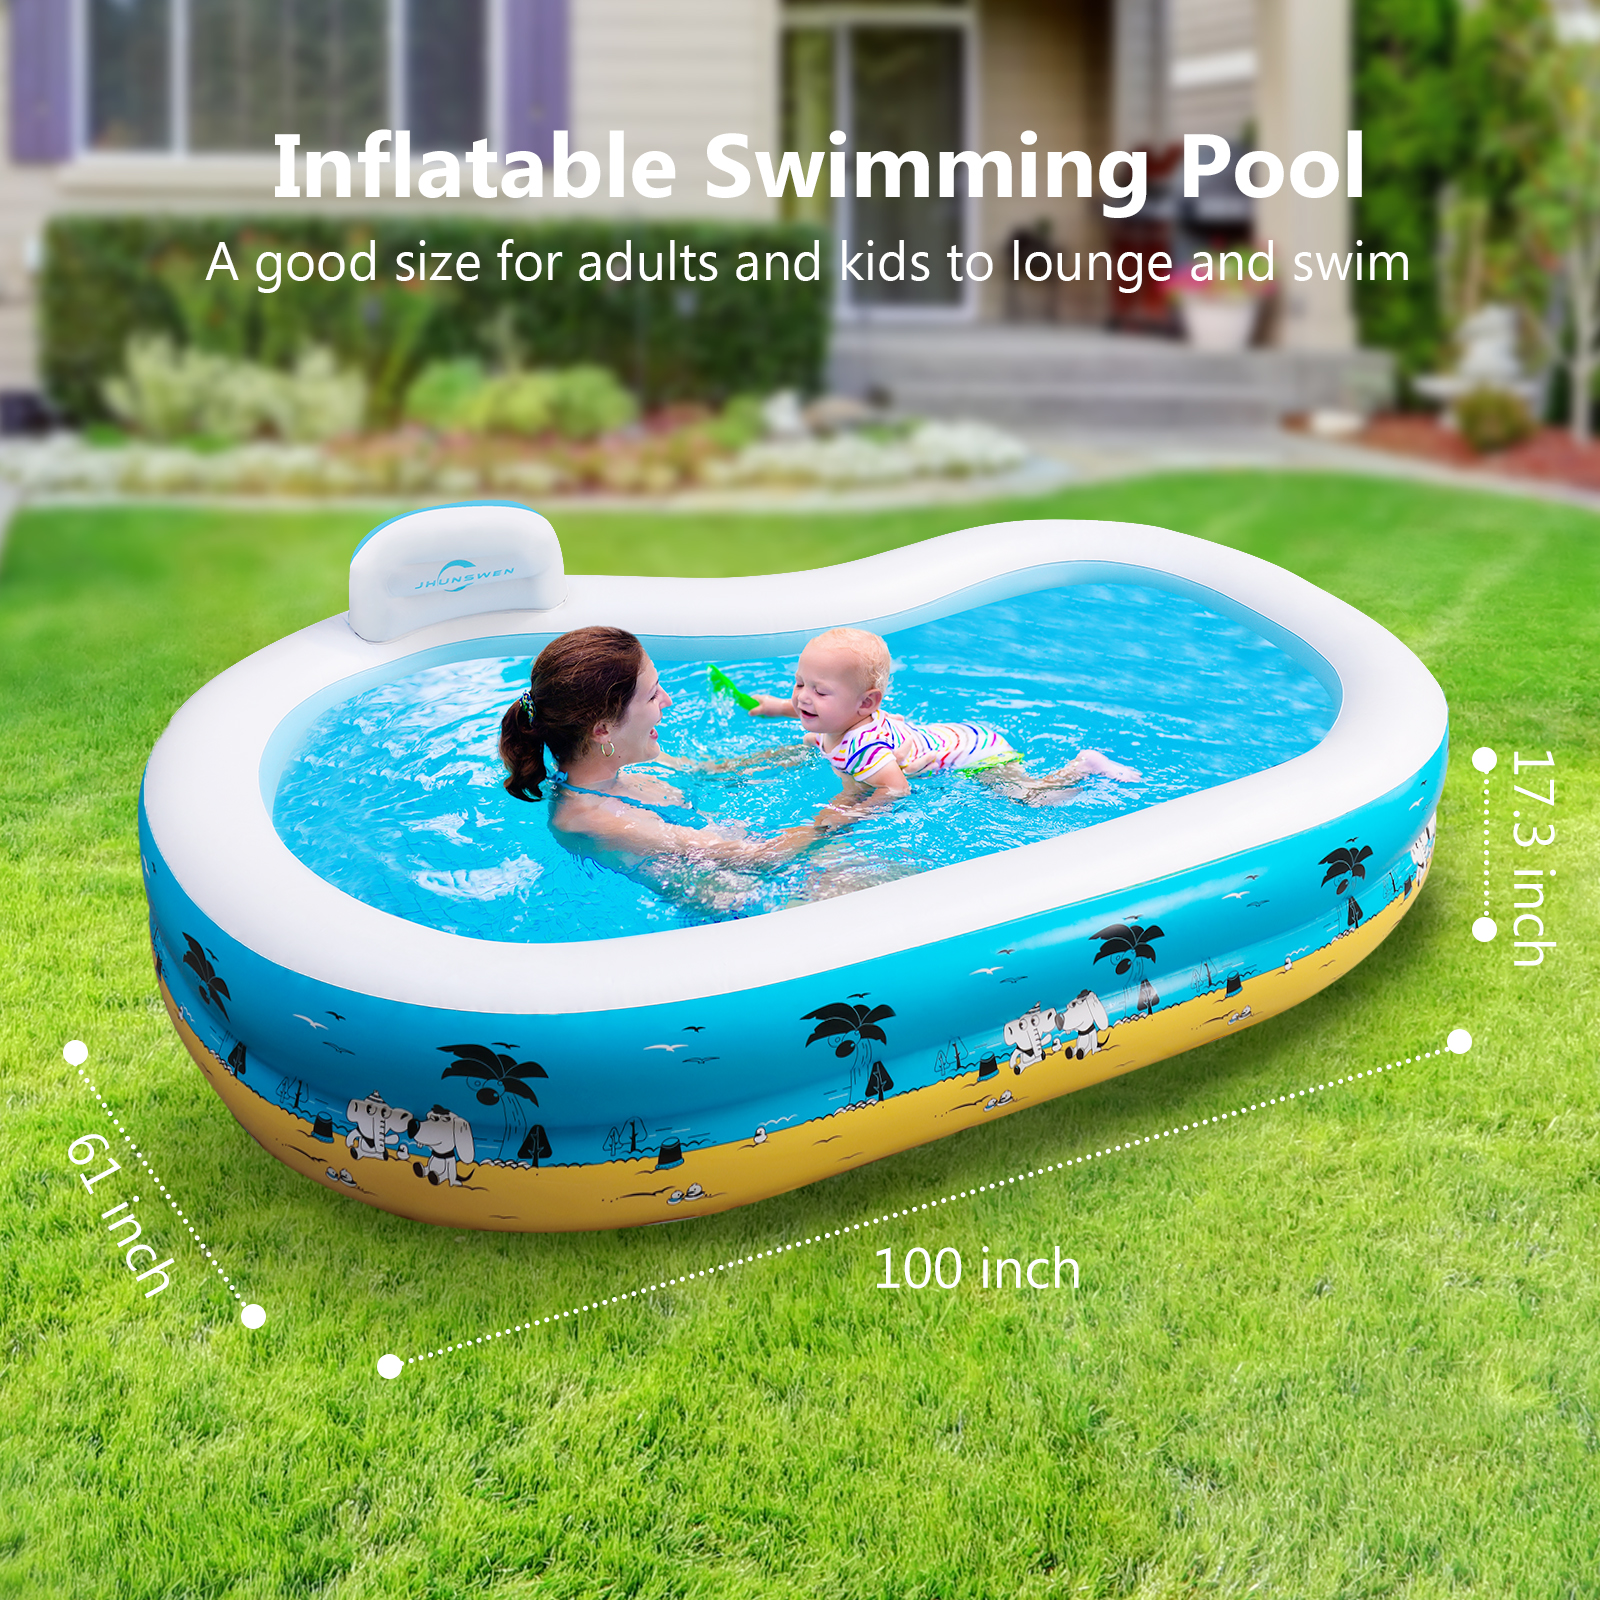 Large Inflatable Pool with Seat - Buy Product on JHUNSWEN